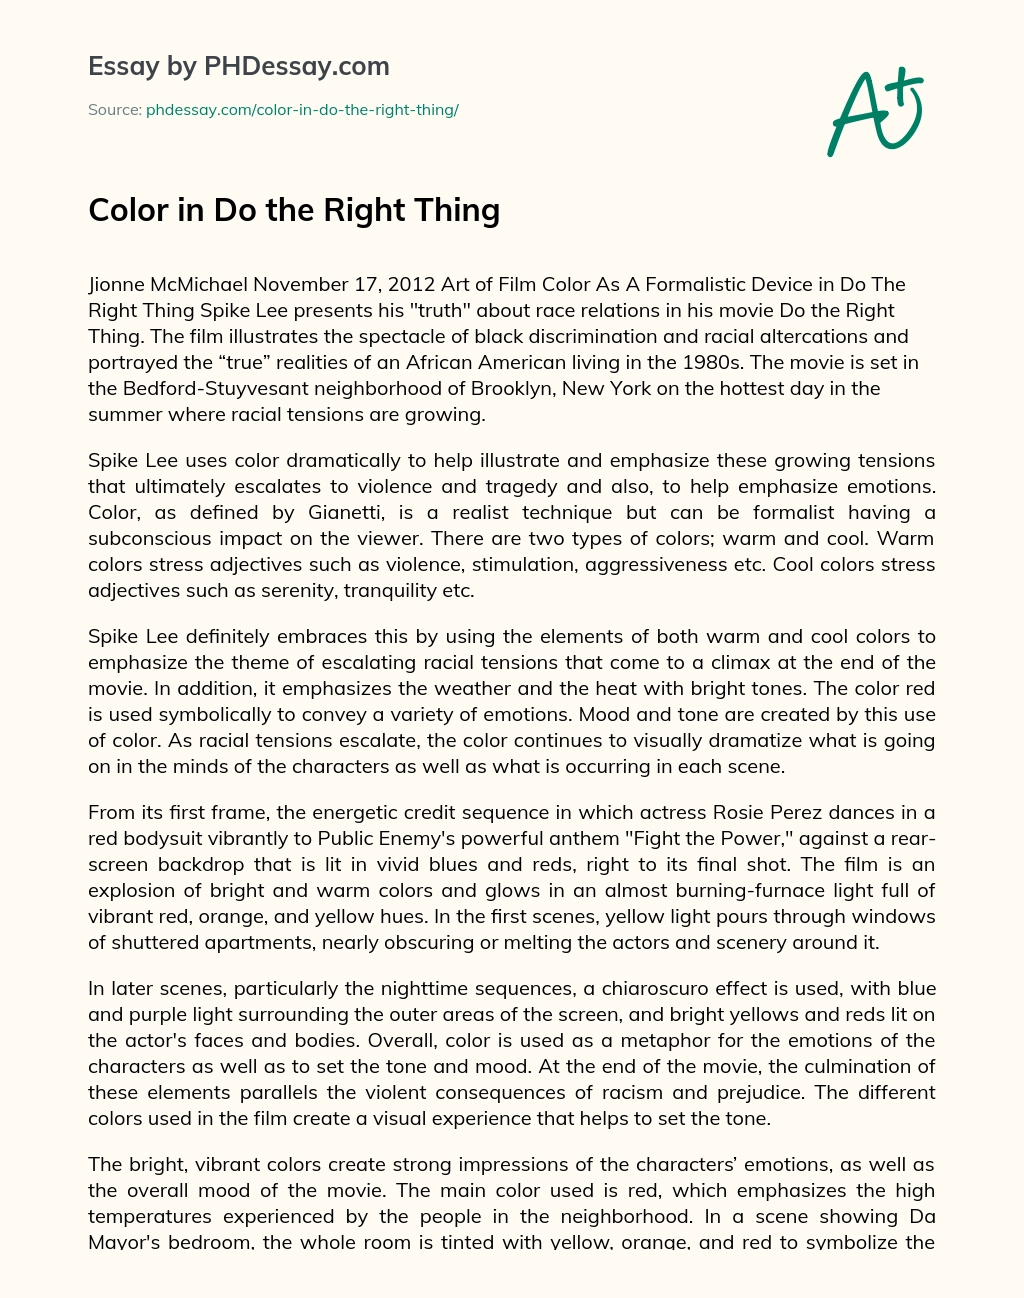 Color in Do the Right Thing essay